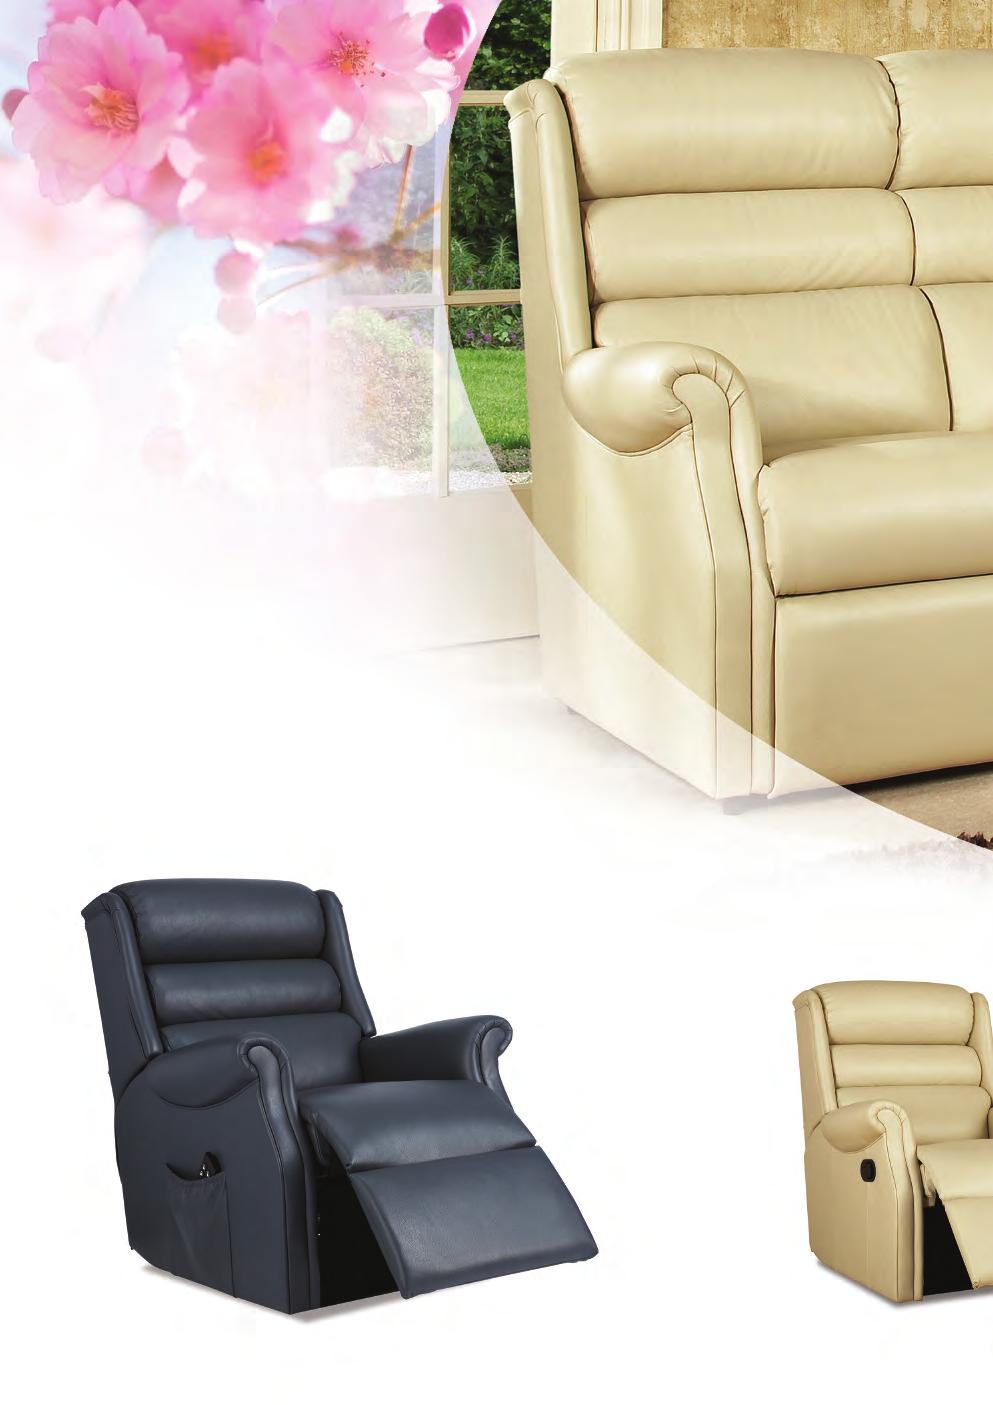 The Sovereign collection offers a 'softer-sit' springing system in the seating for even more comfort.